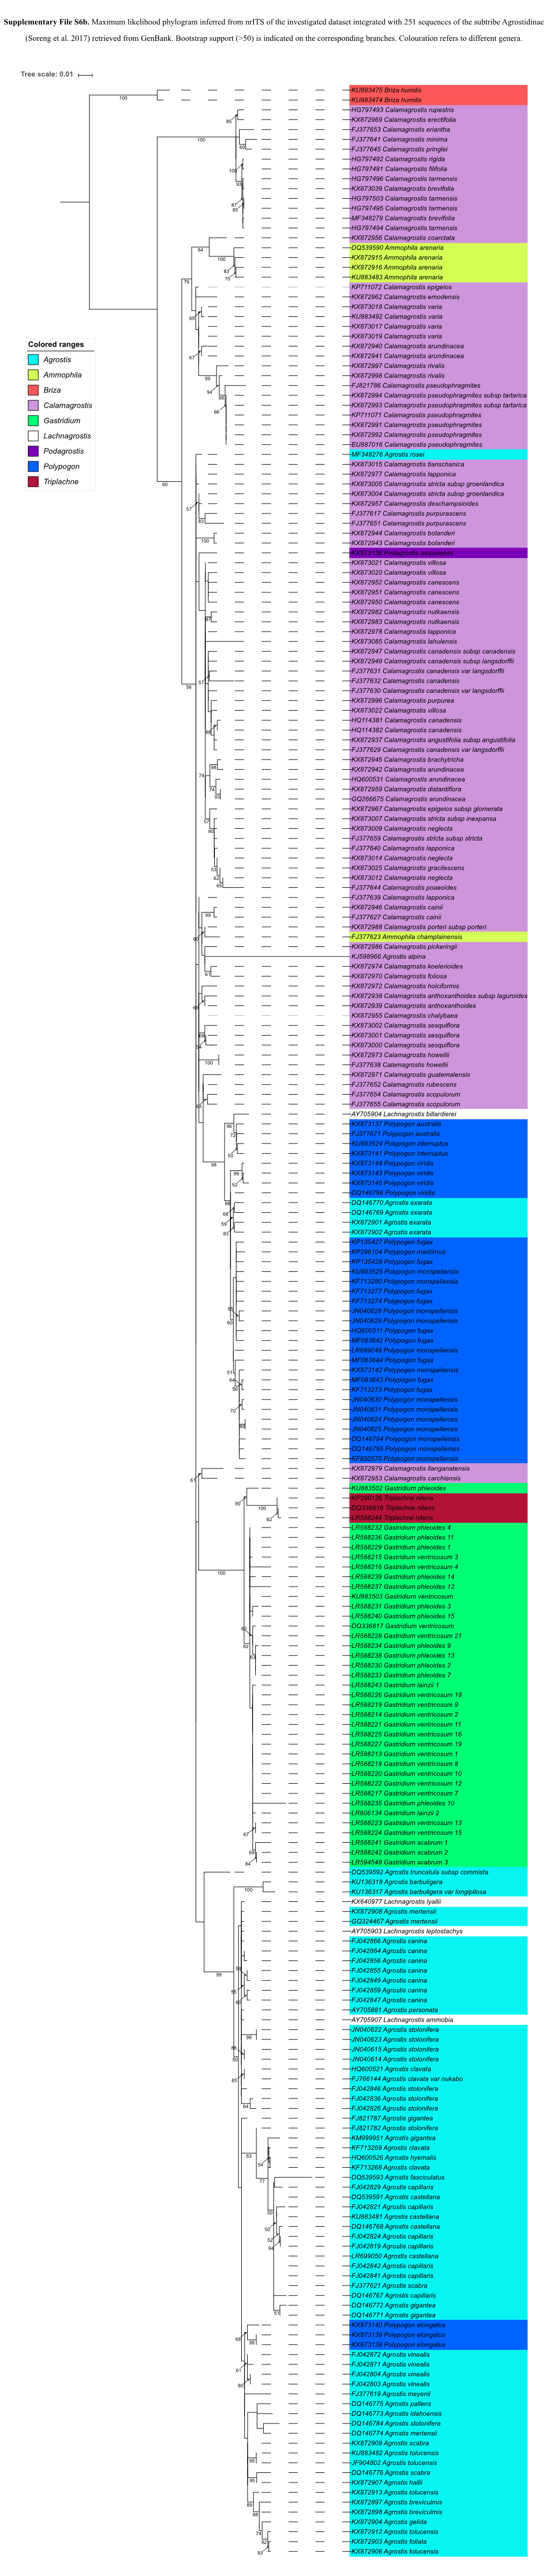 Supplementary File S6b. Maximum Likelihood Phylogram Inferred from Nrits of the Investigated Dataset Integrated with 251 Sequences of the Subtribe Agrostidinae